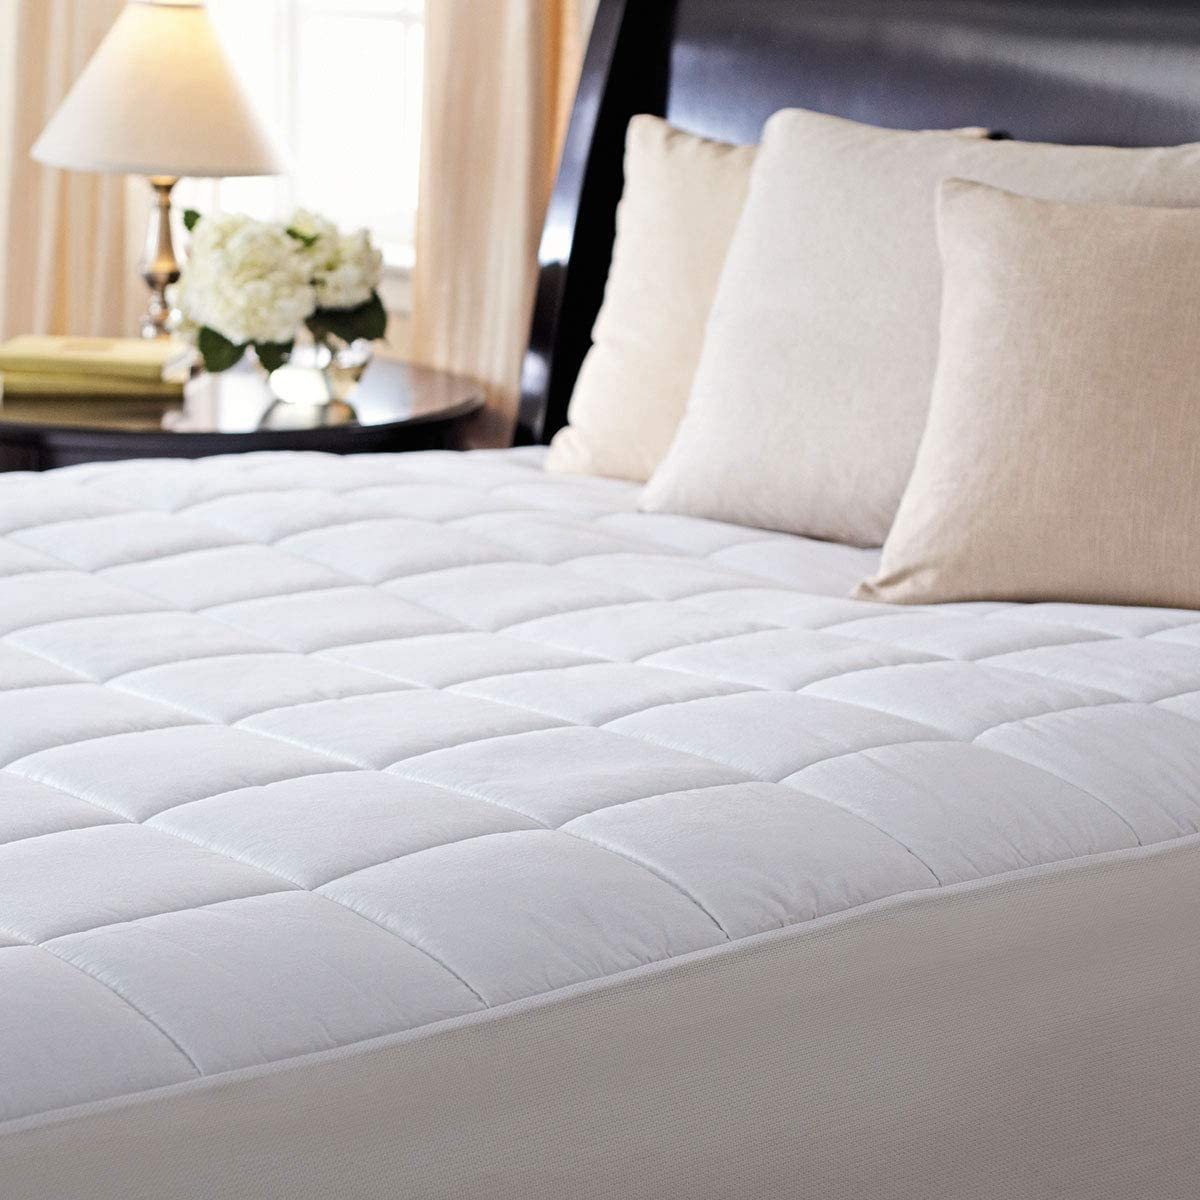 Primary image for King-Sized Sunbeam Premium Luxury Quilted Electric Heated Mattress Pad